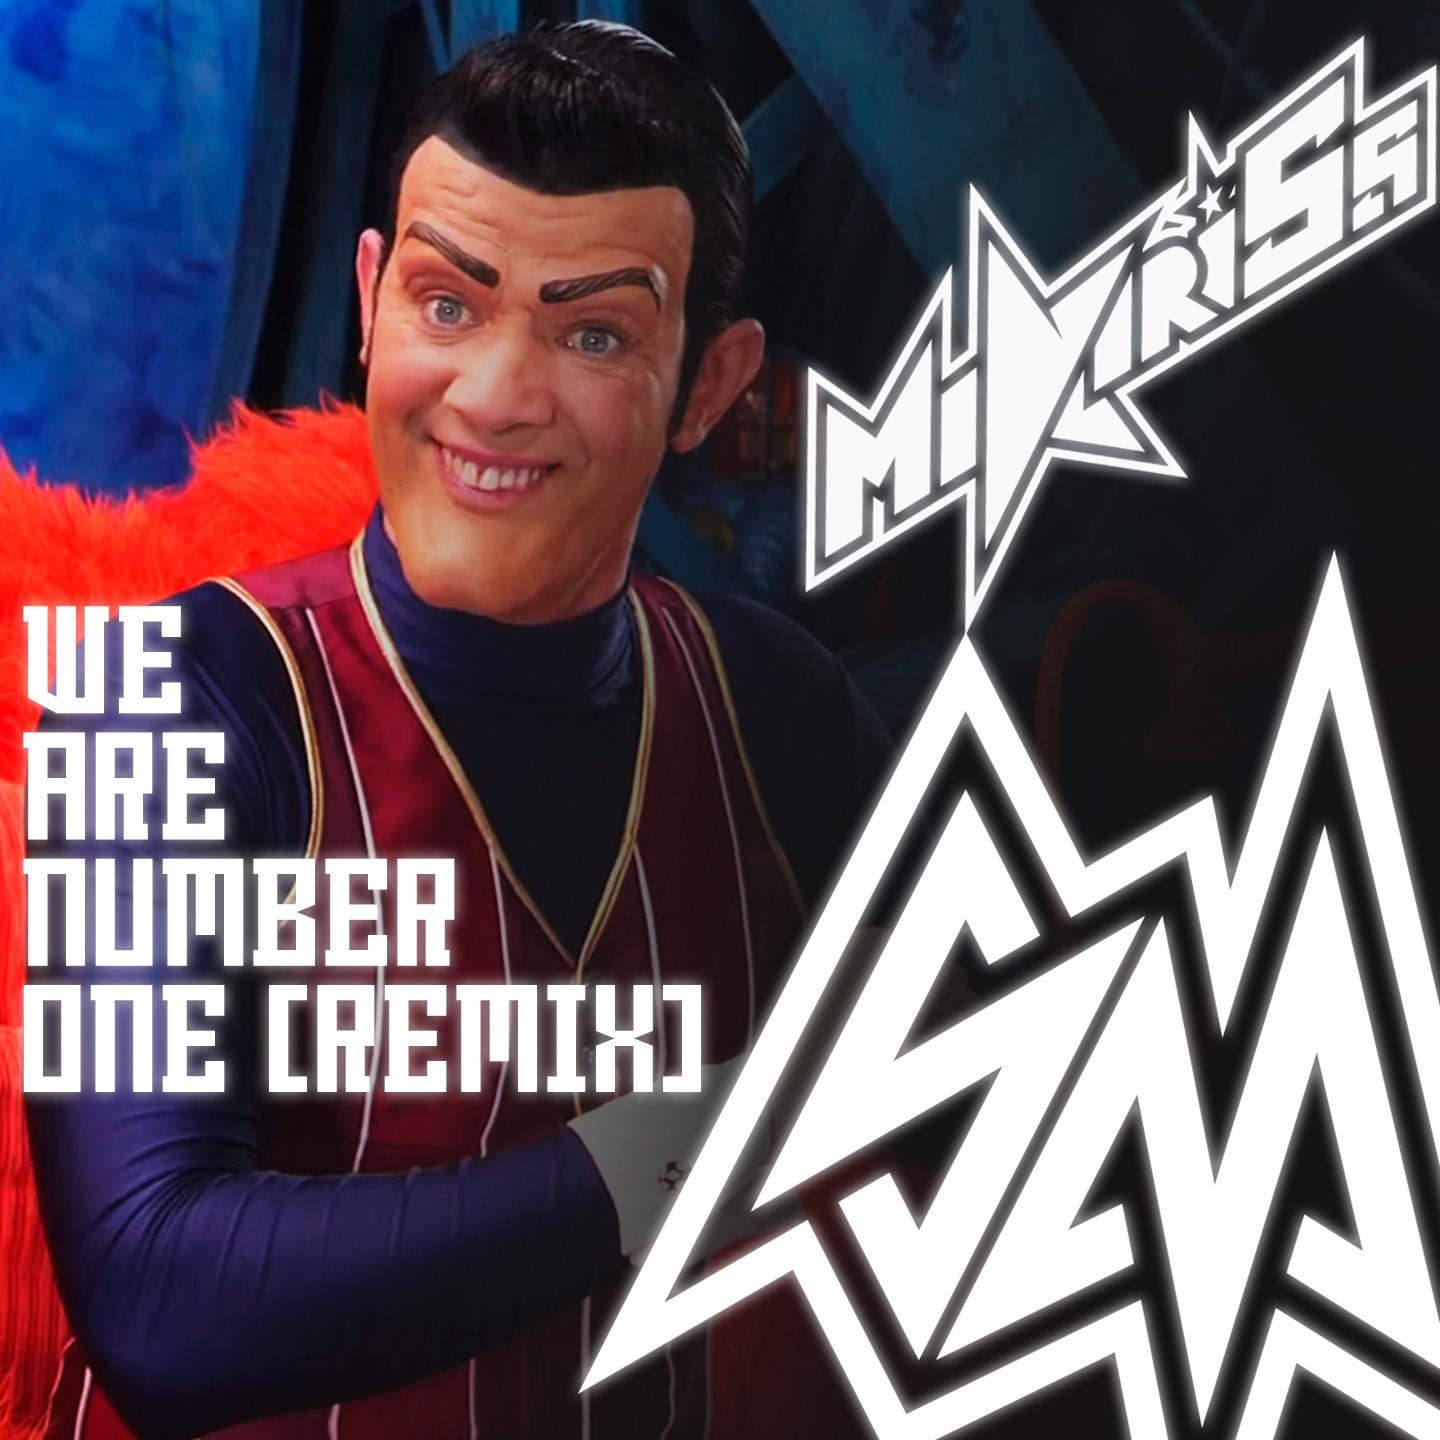 We Are Number One Remix (Instrumental)